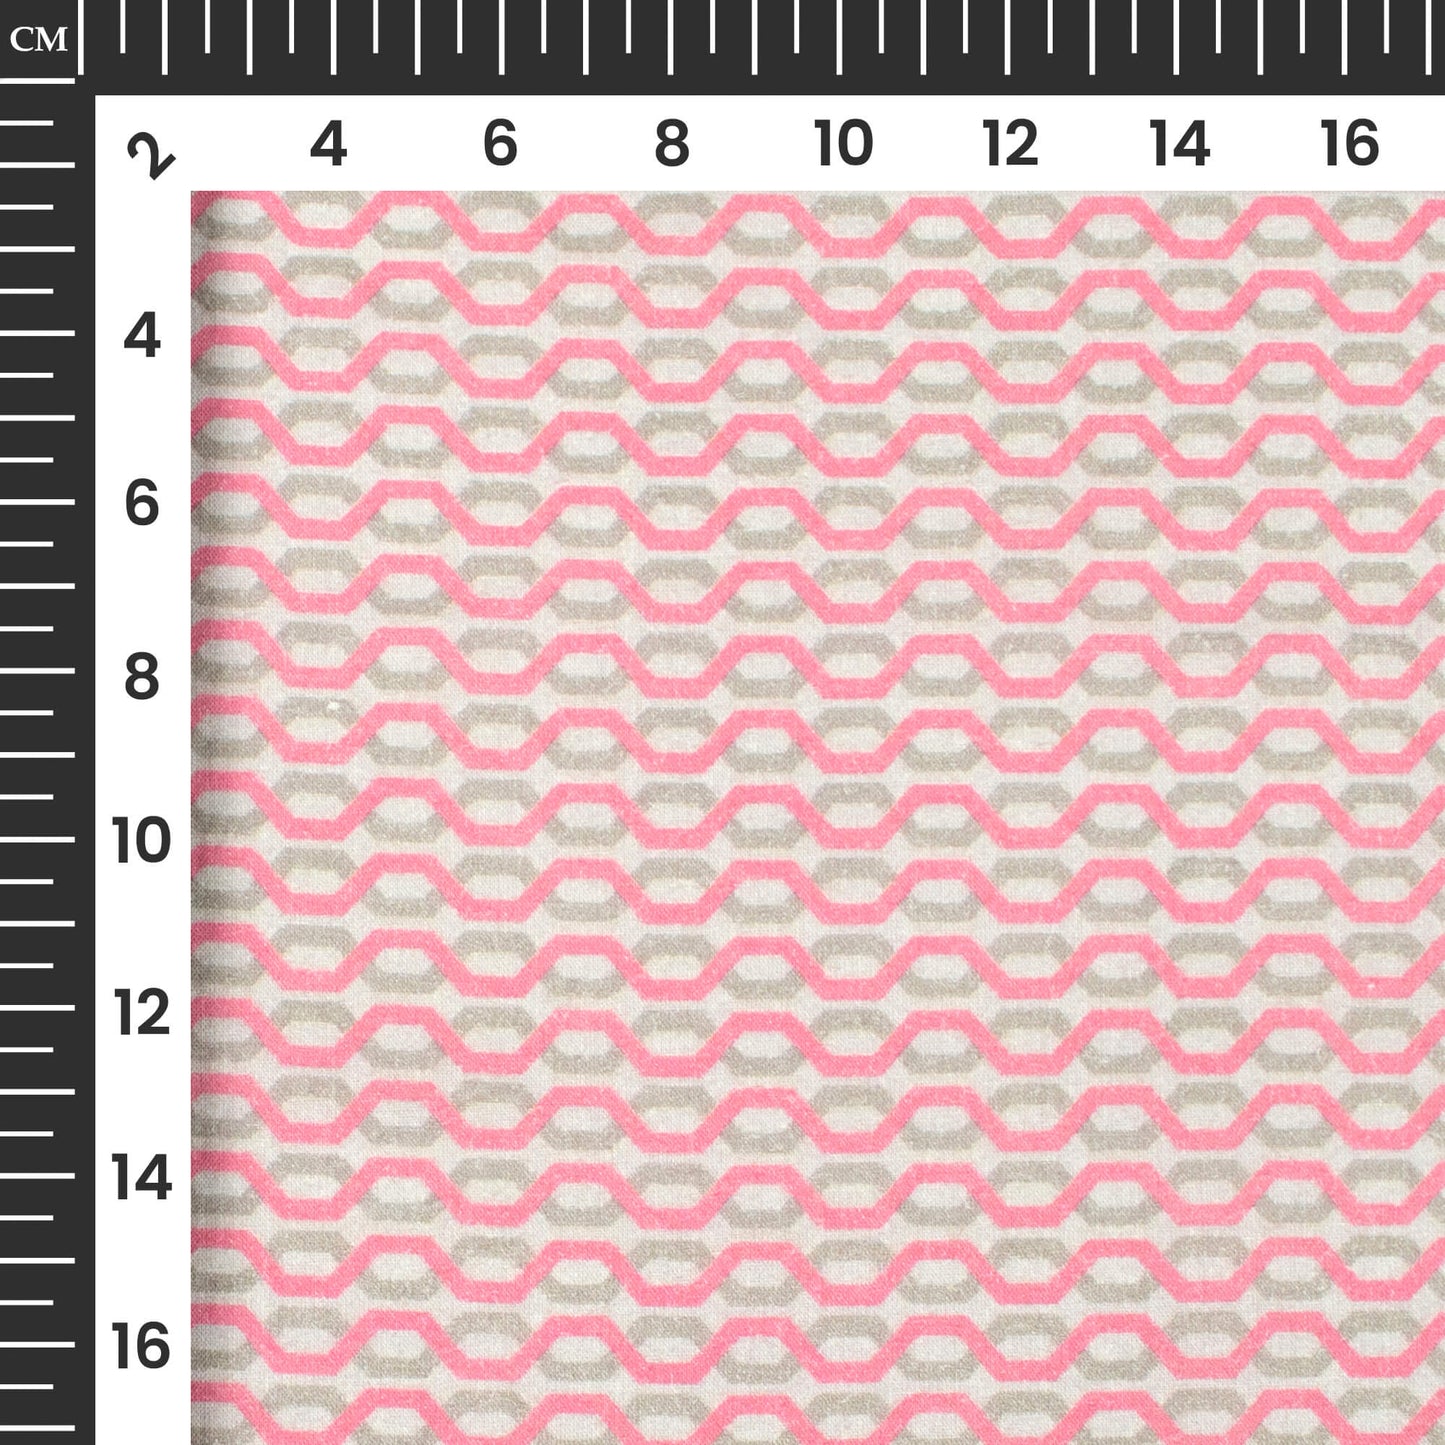 Taffy Pink And Grey Chain Digital Print Cotton Cambric Fabric